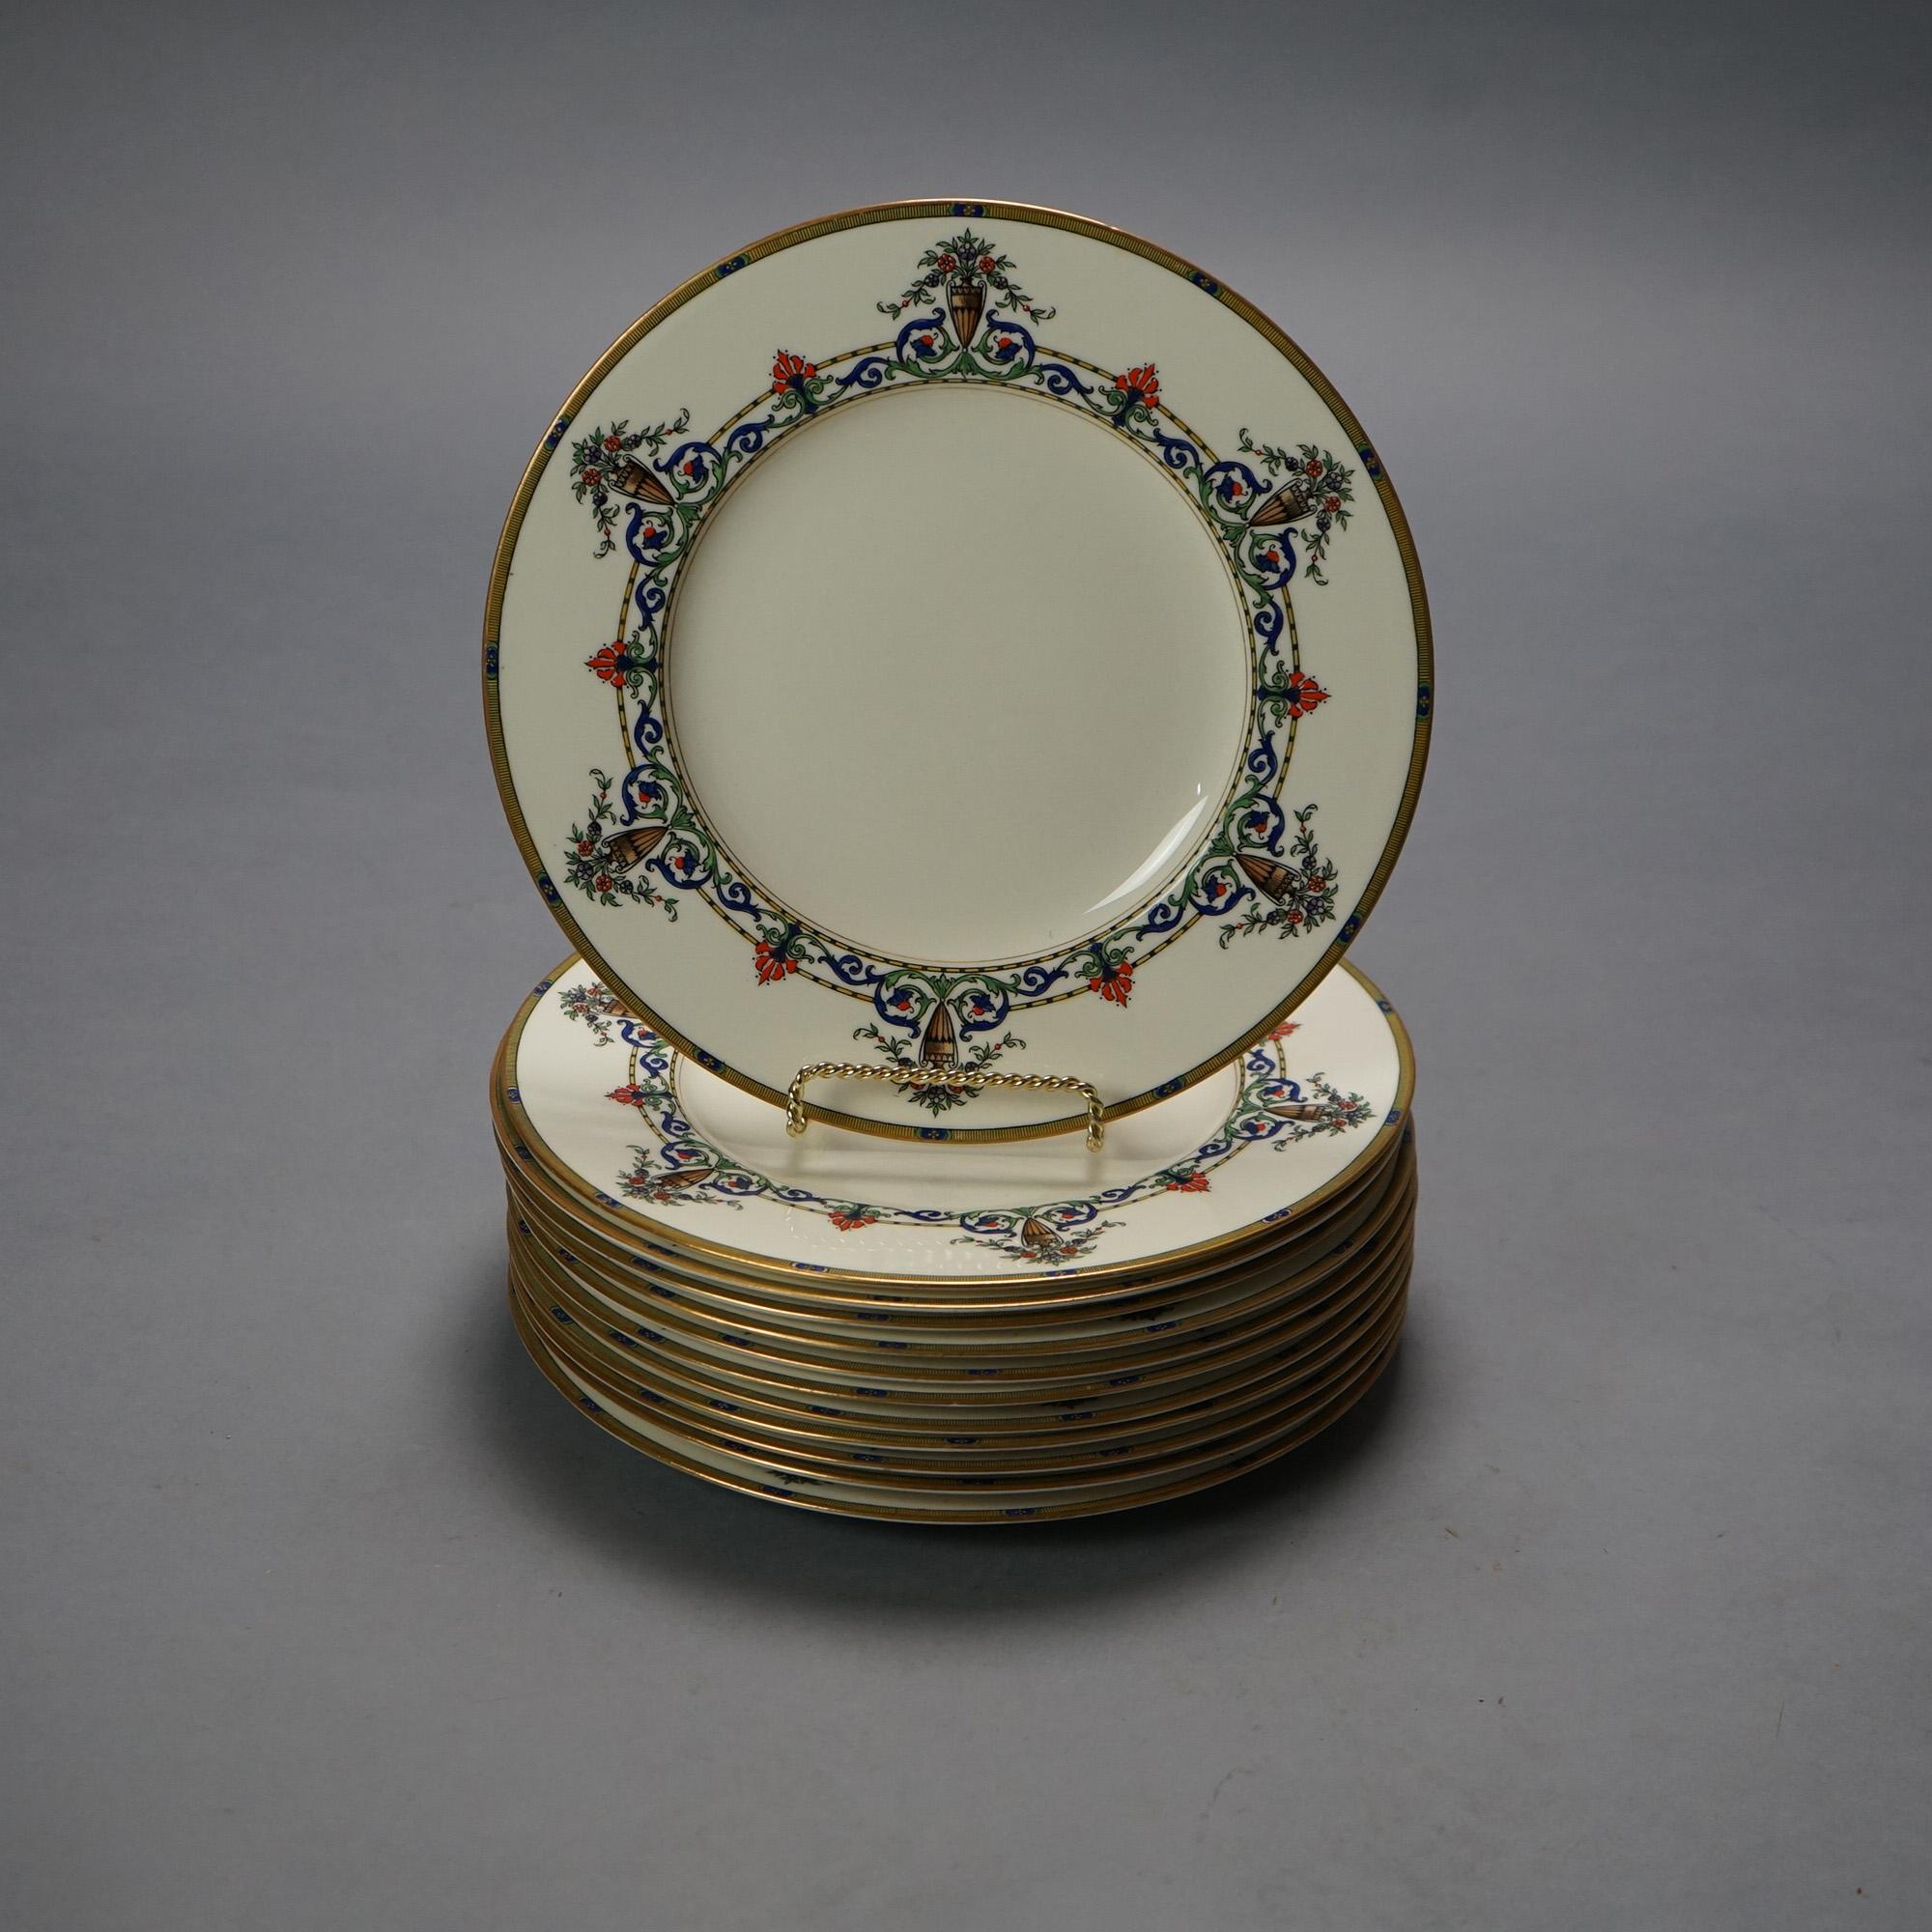 Twelve Antique English Royal Worcester Fine China Plates Retailed by Hardy & Hayes with Neoclassical Floral Urns, Garland and Gilt Highlights, C1910

Measures - .75